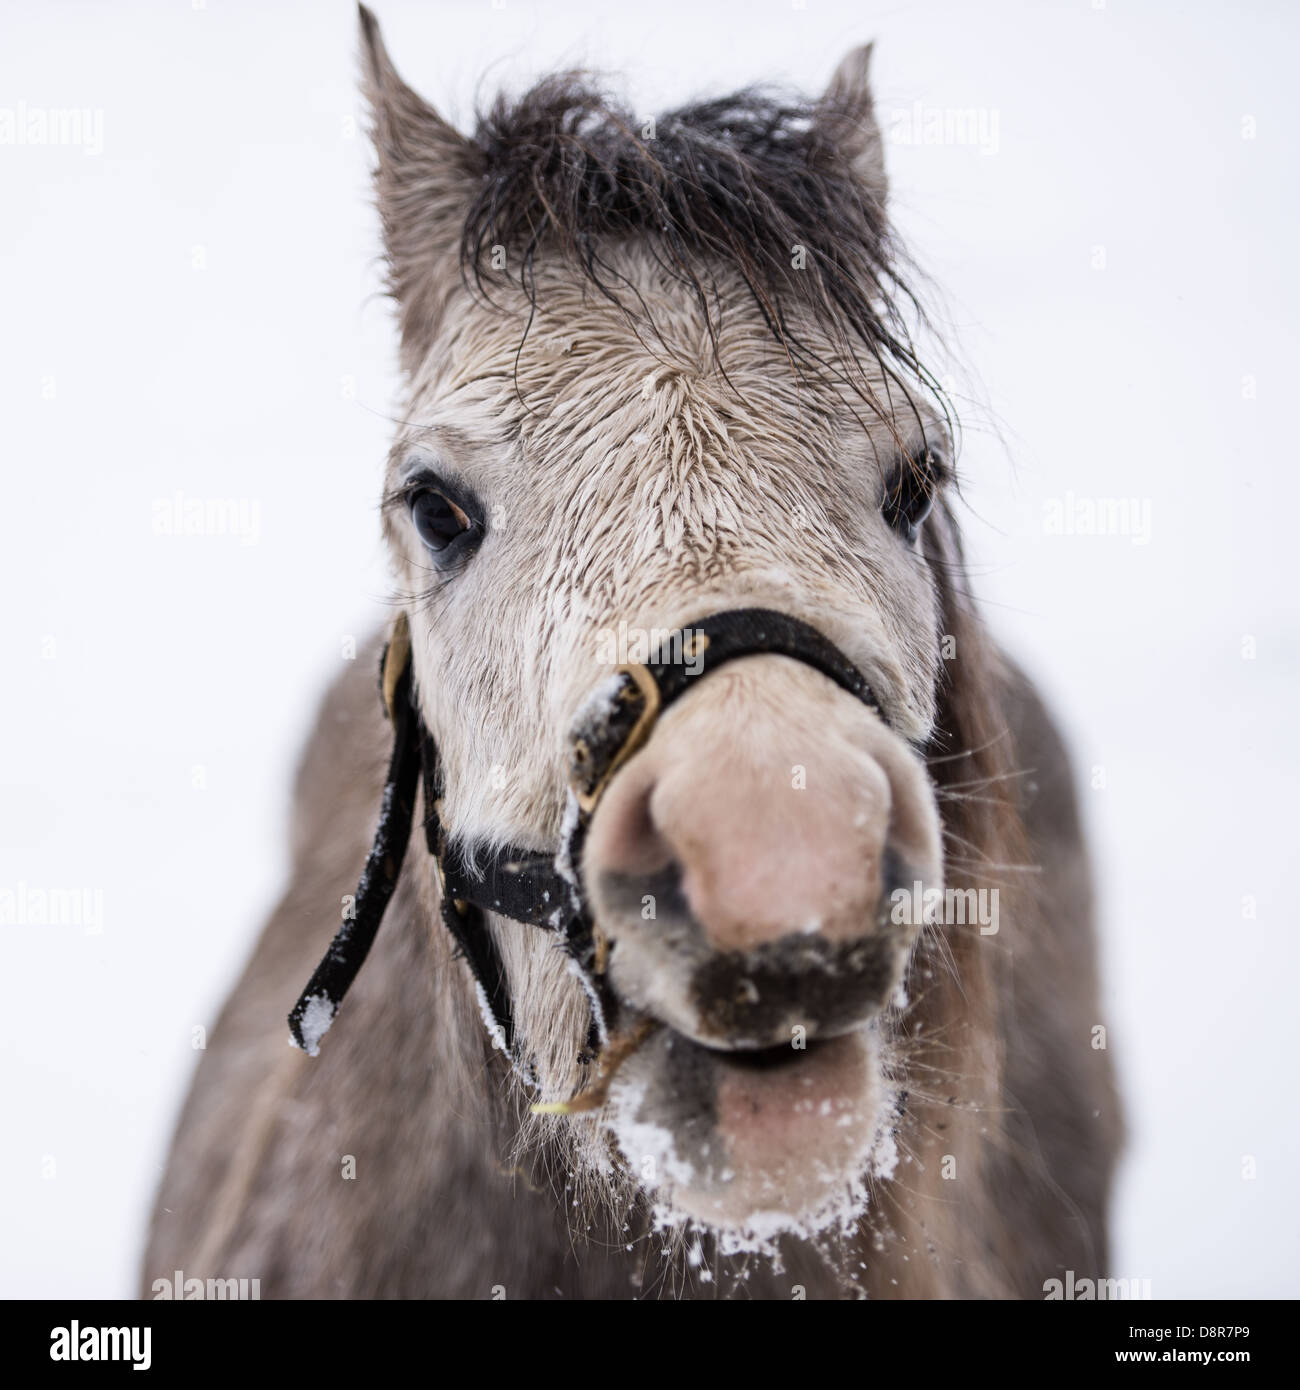 Laughing horse in Snowy Derbyshire Peak District Stock Photo